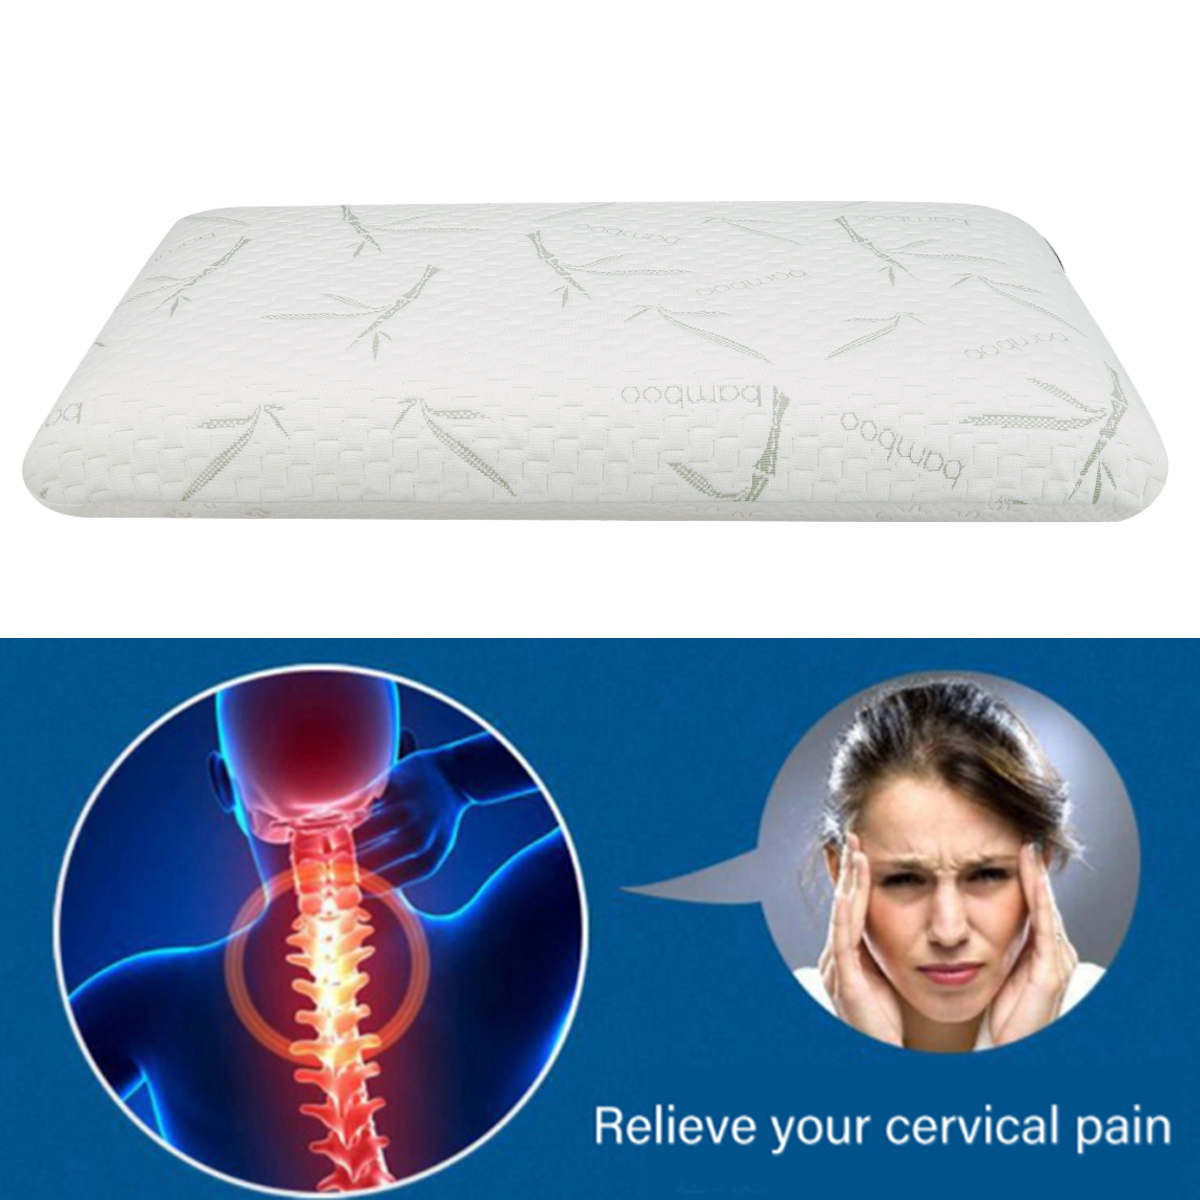 Bamboo-Memory-Foam-Pillow-Reversible-Pillow-Orthopedic-Slow-Rebound-Cervical-Neck-Pain-Relief-1813962-5